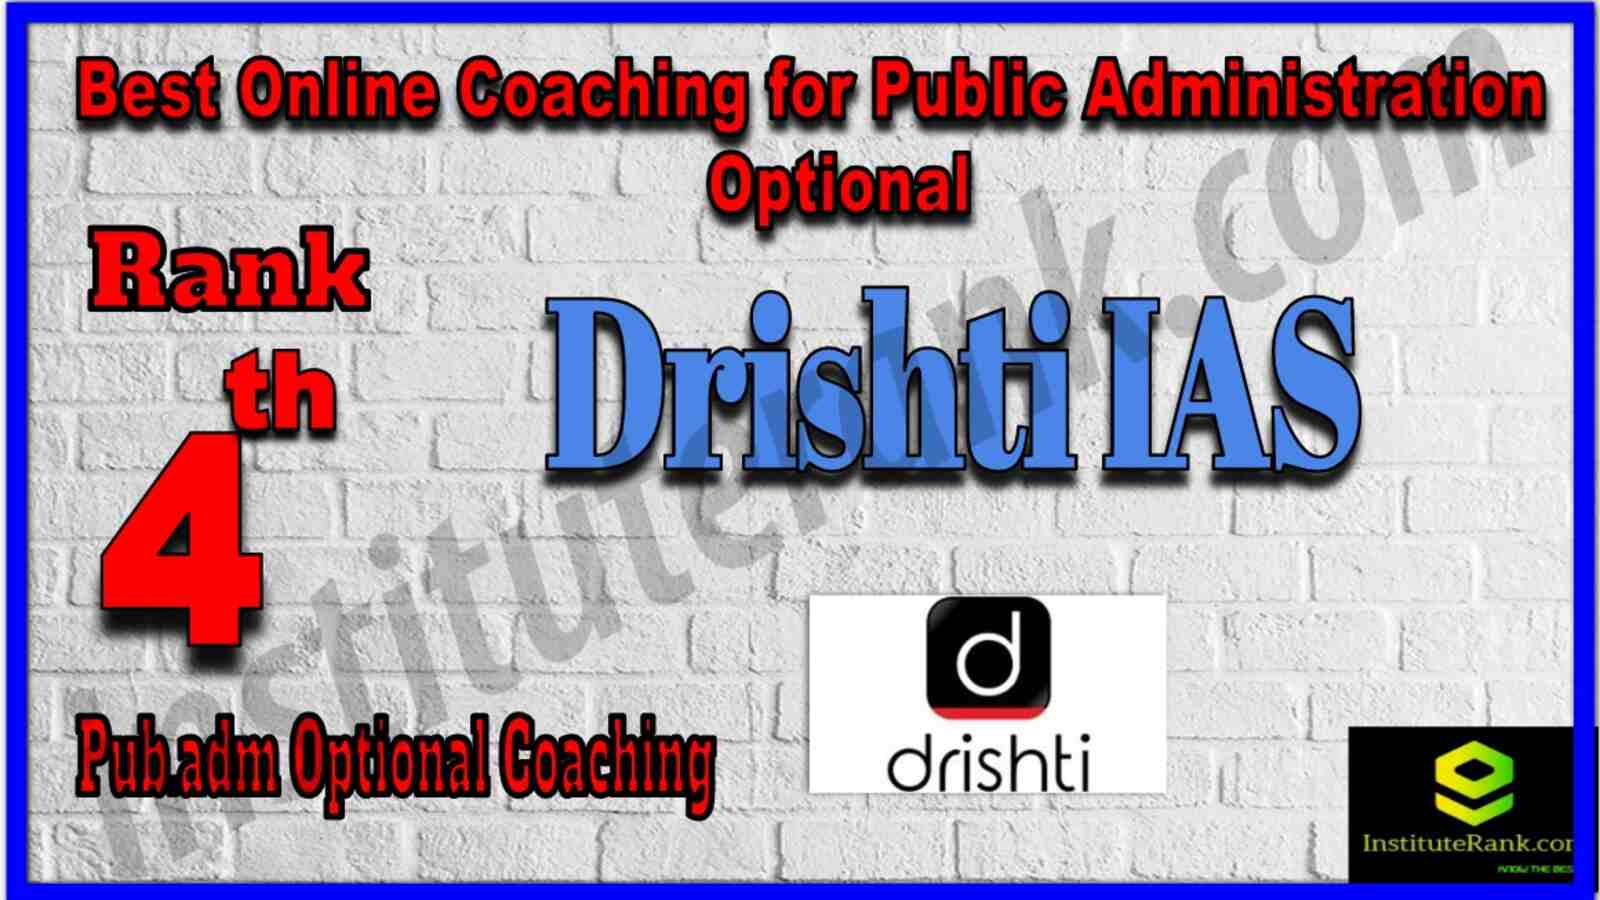 Rank 4 Best Online Coaching for Public Administration Optional